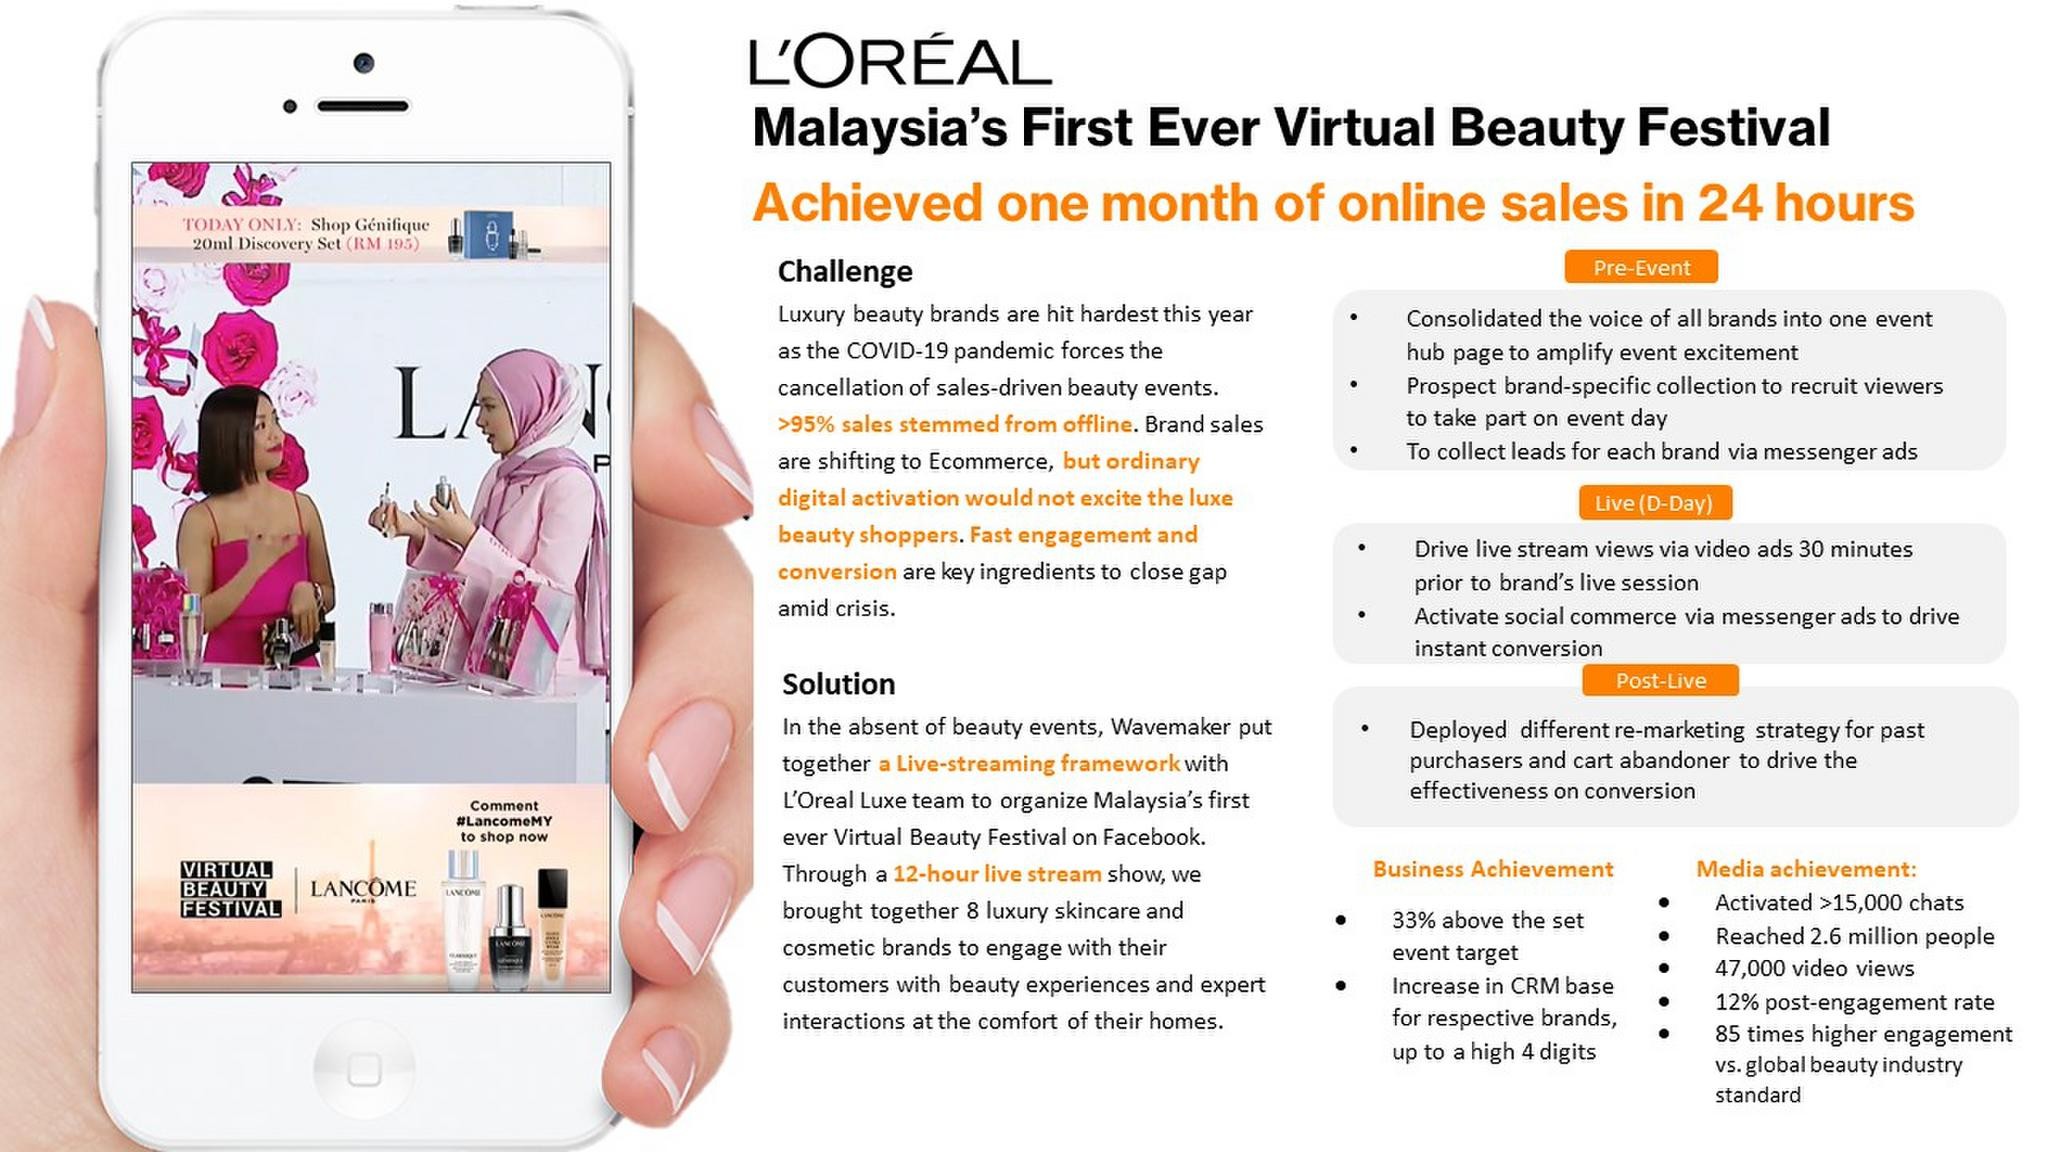 The First Ever 12-Hour Virtual Beauty Festival by L'Oreal